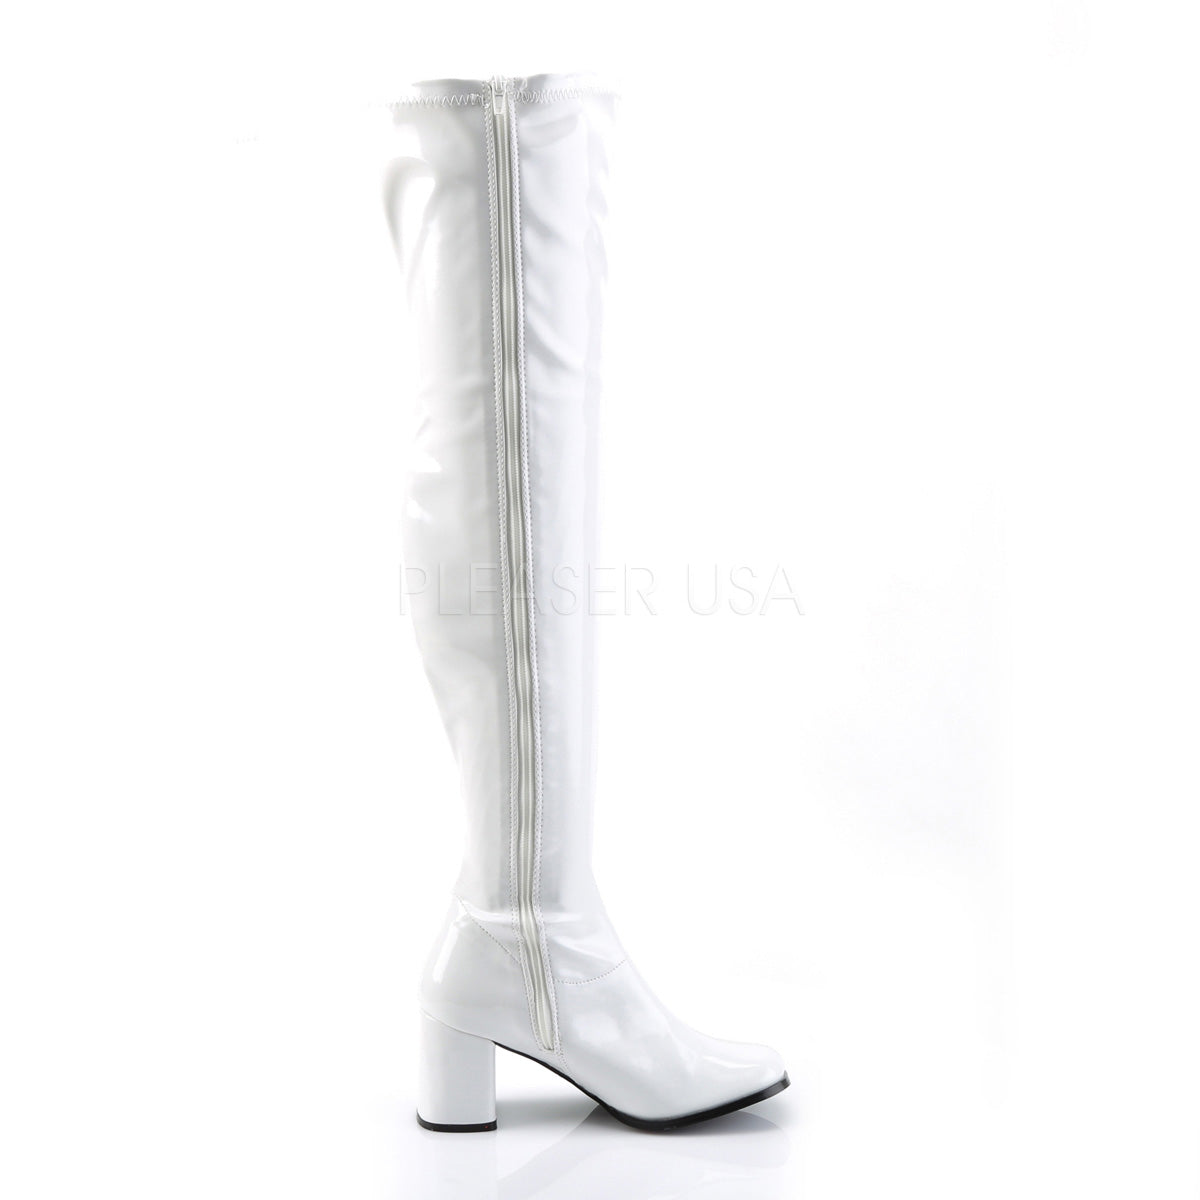 Thigh High Boots with 3-inch Block Heel 